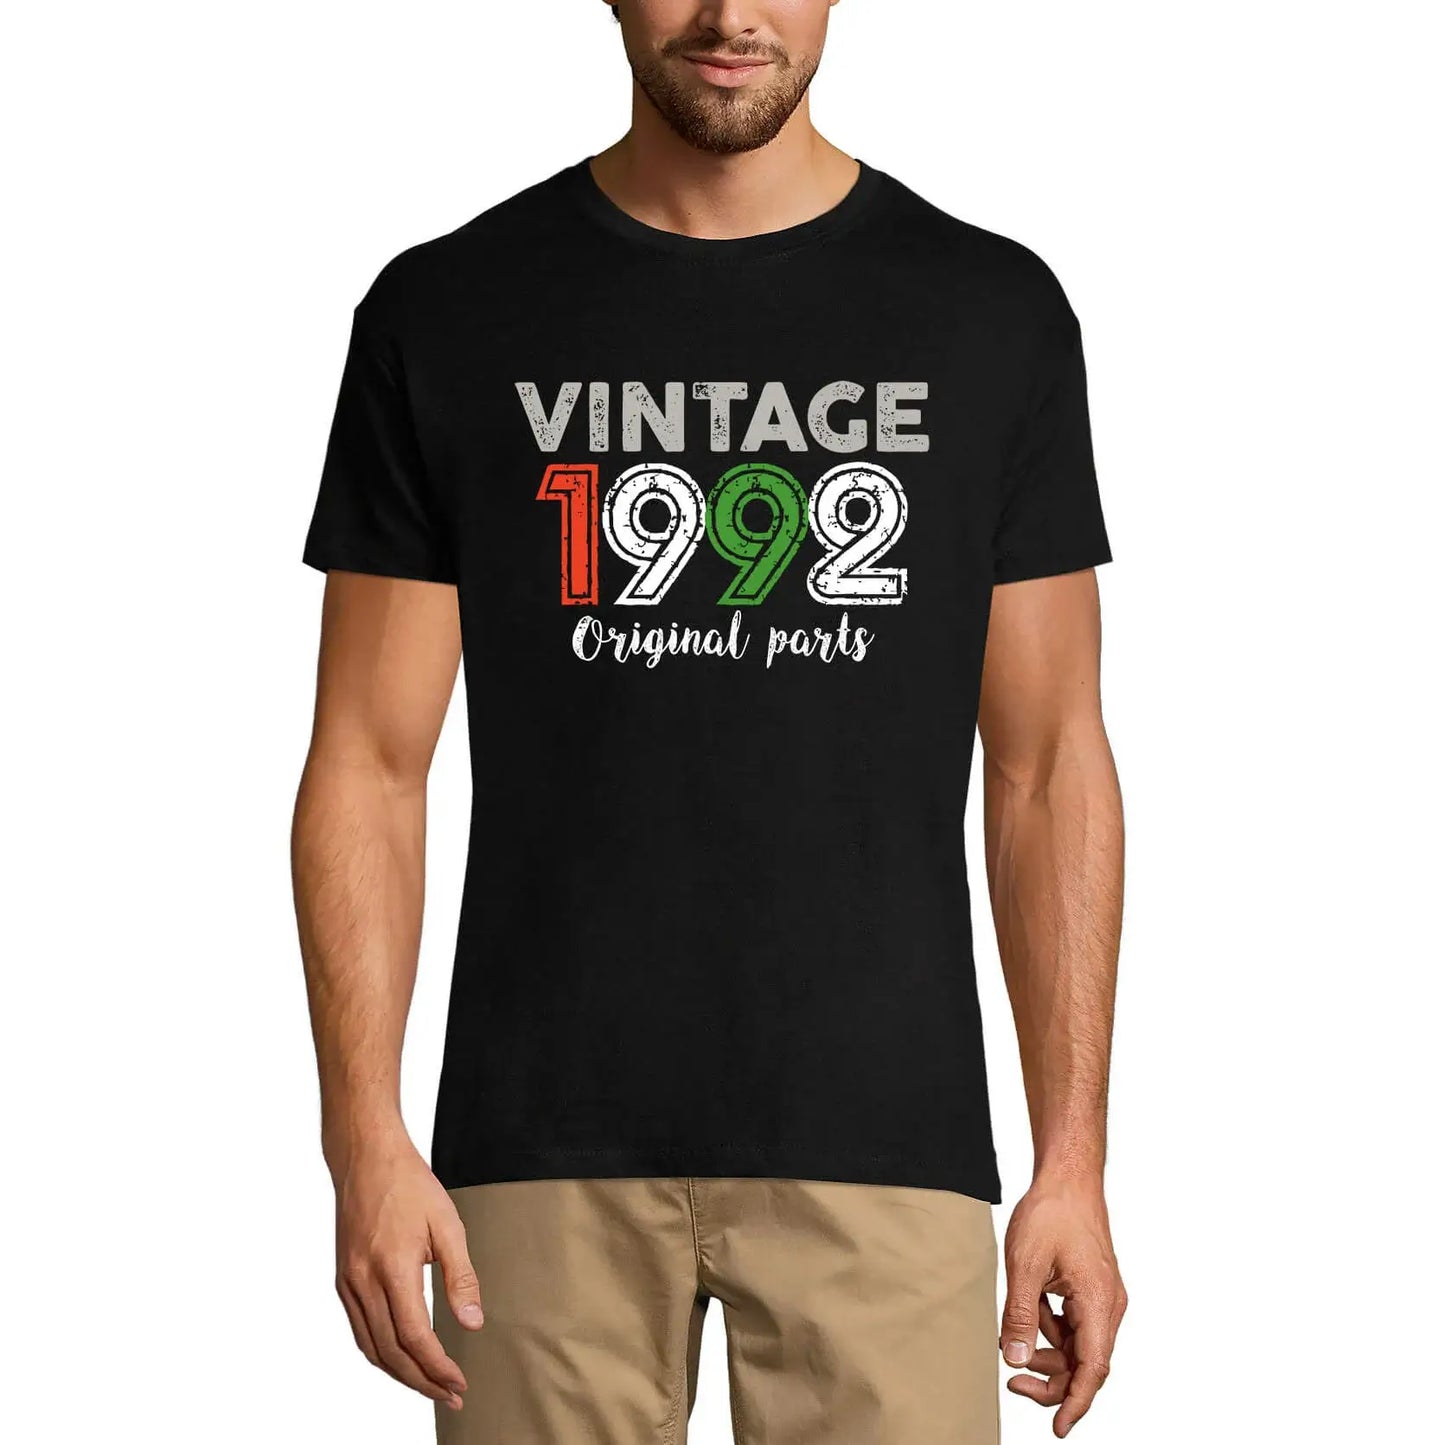 Men's Graphic T-Shirt Original Parts 1992 32nd Birthday Anniversary 32 Year Old Gift 1992 Vintage Eco-Friendly Short Sleeve Novelty Tee